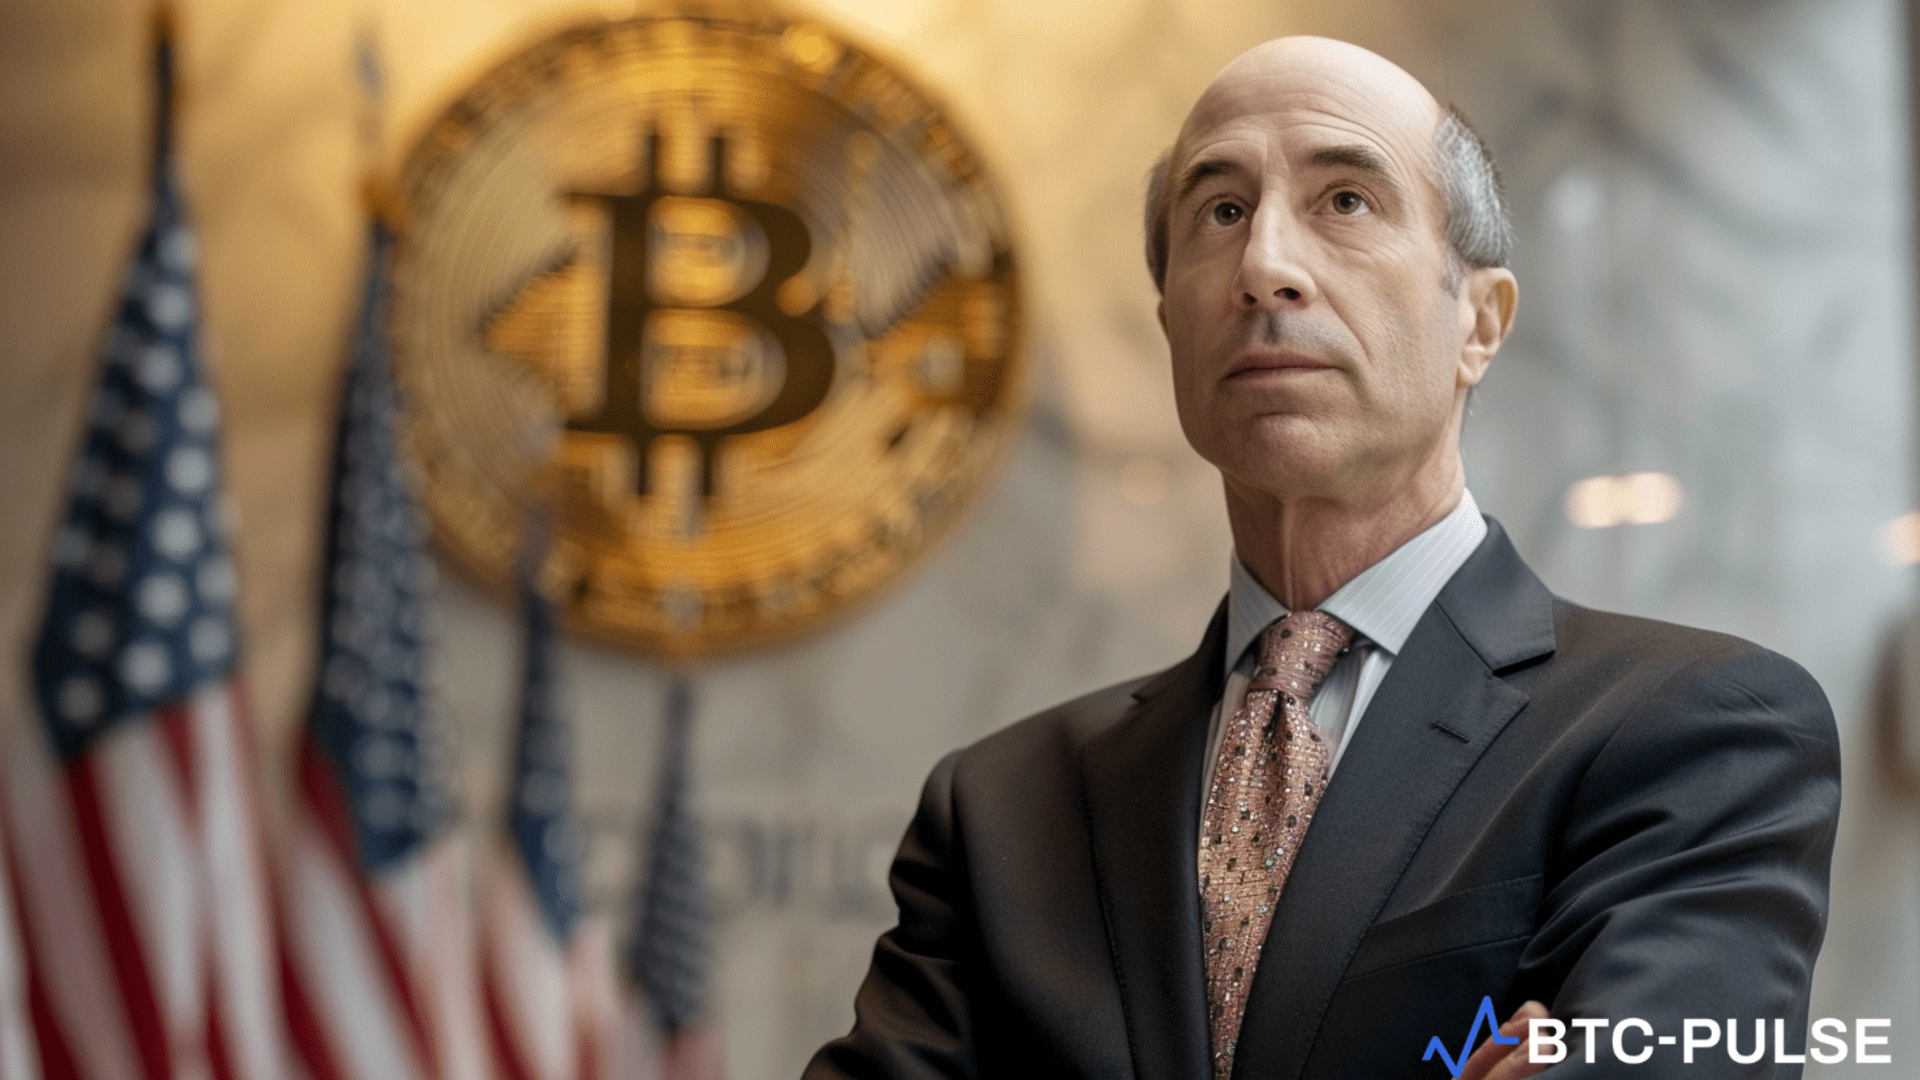 Coinbase Attorney Claims Gary Gensler’s Email is Crucial Evidence in SEC Lawsuit